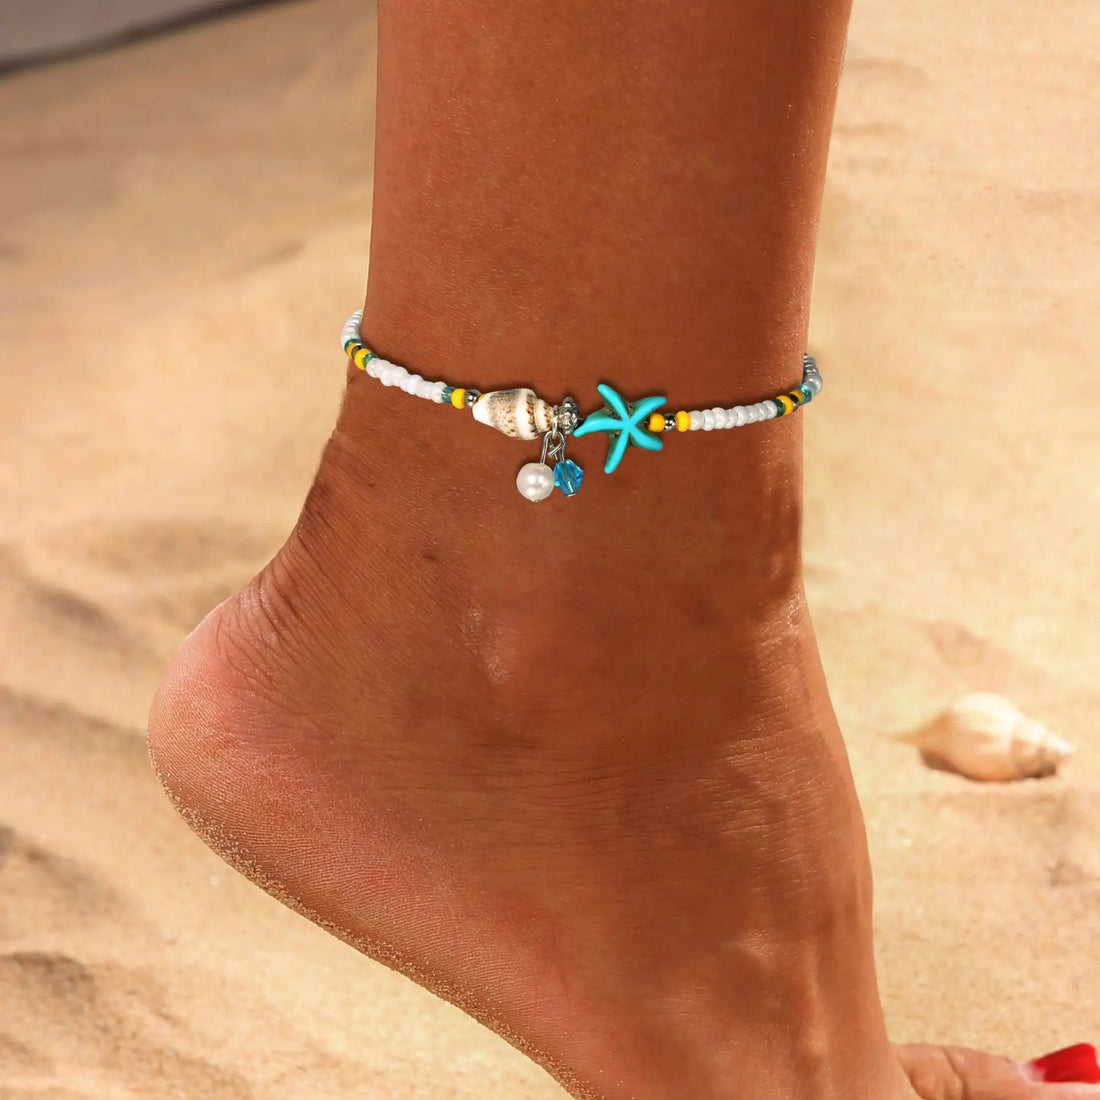 Vintage Sea Starfish Shell Beads Chain Anklets for Women New Conch Pearl Ankle Bracelet Handmade Bohemian Leg Jewelry Gifts